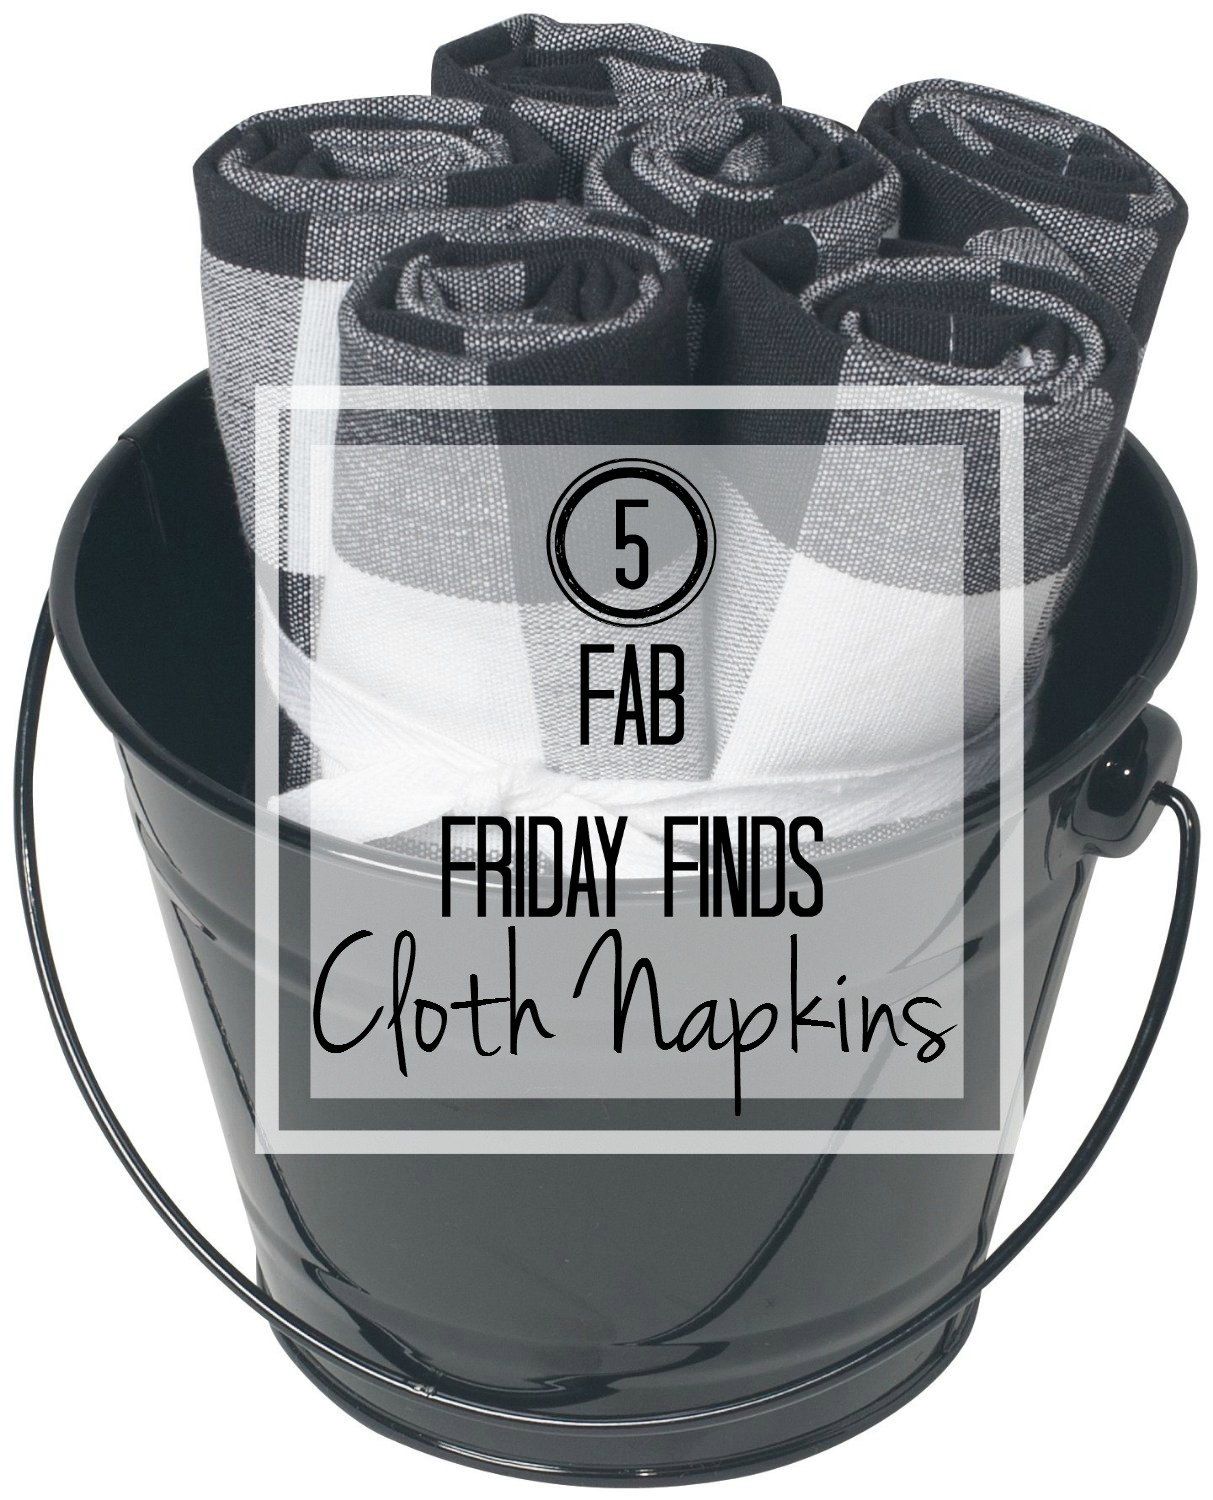 5 fab friday finds - cloth napkins